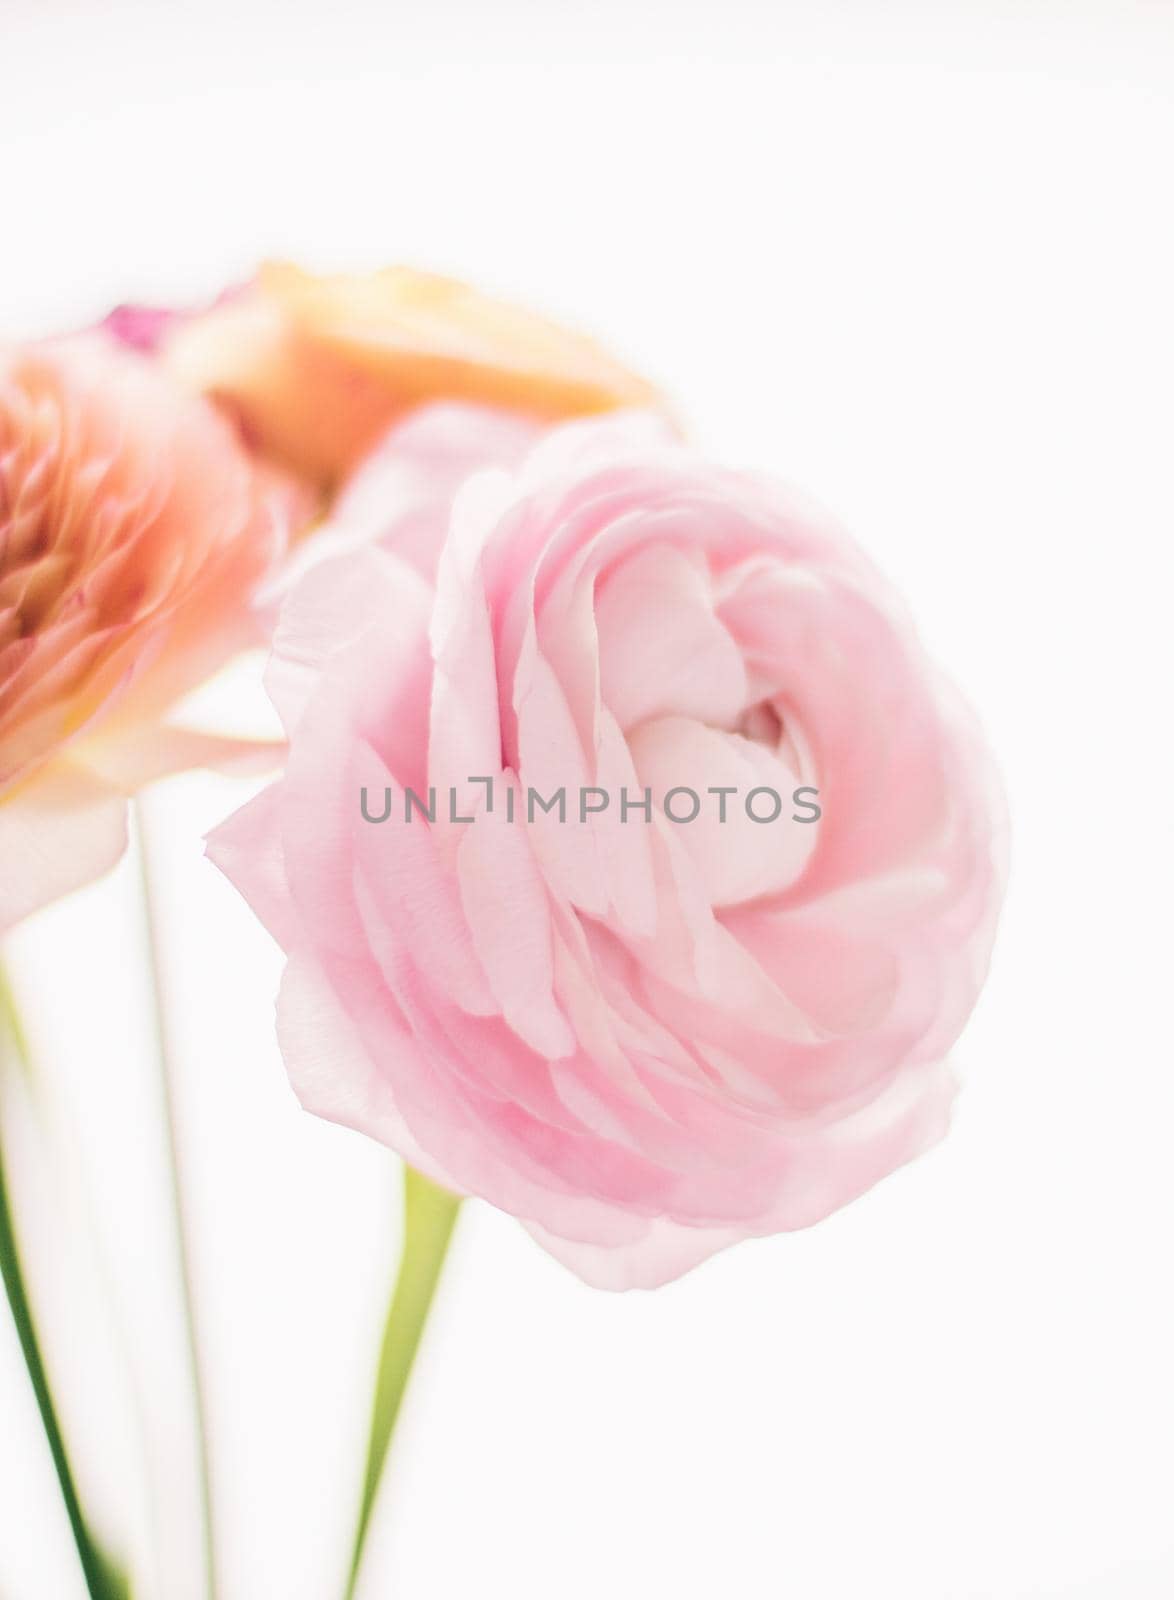 pink rose flowers from the garden - wedding, holiday and floral garden styled concept by Anneleven